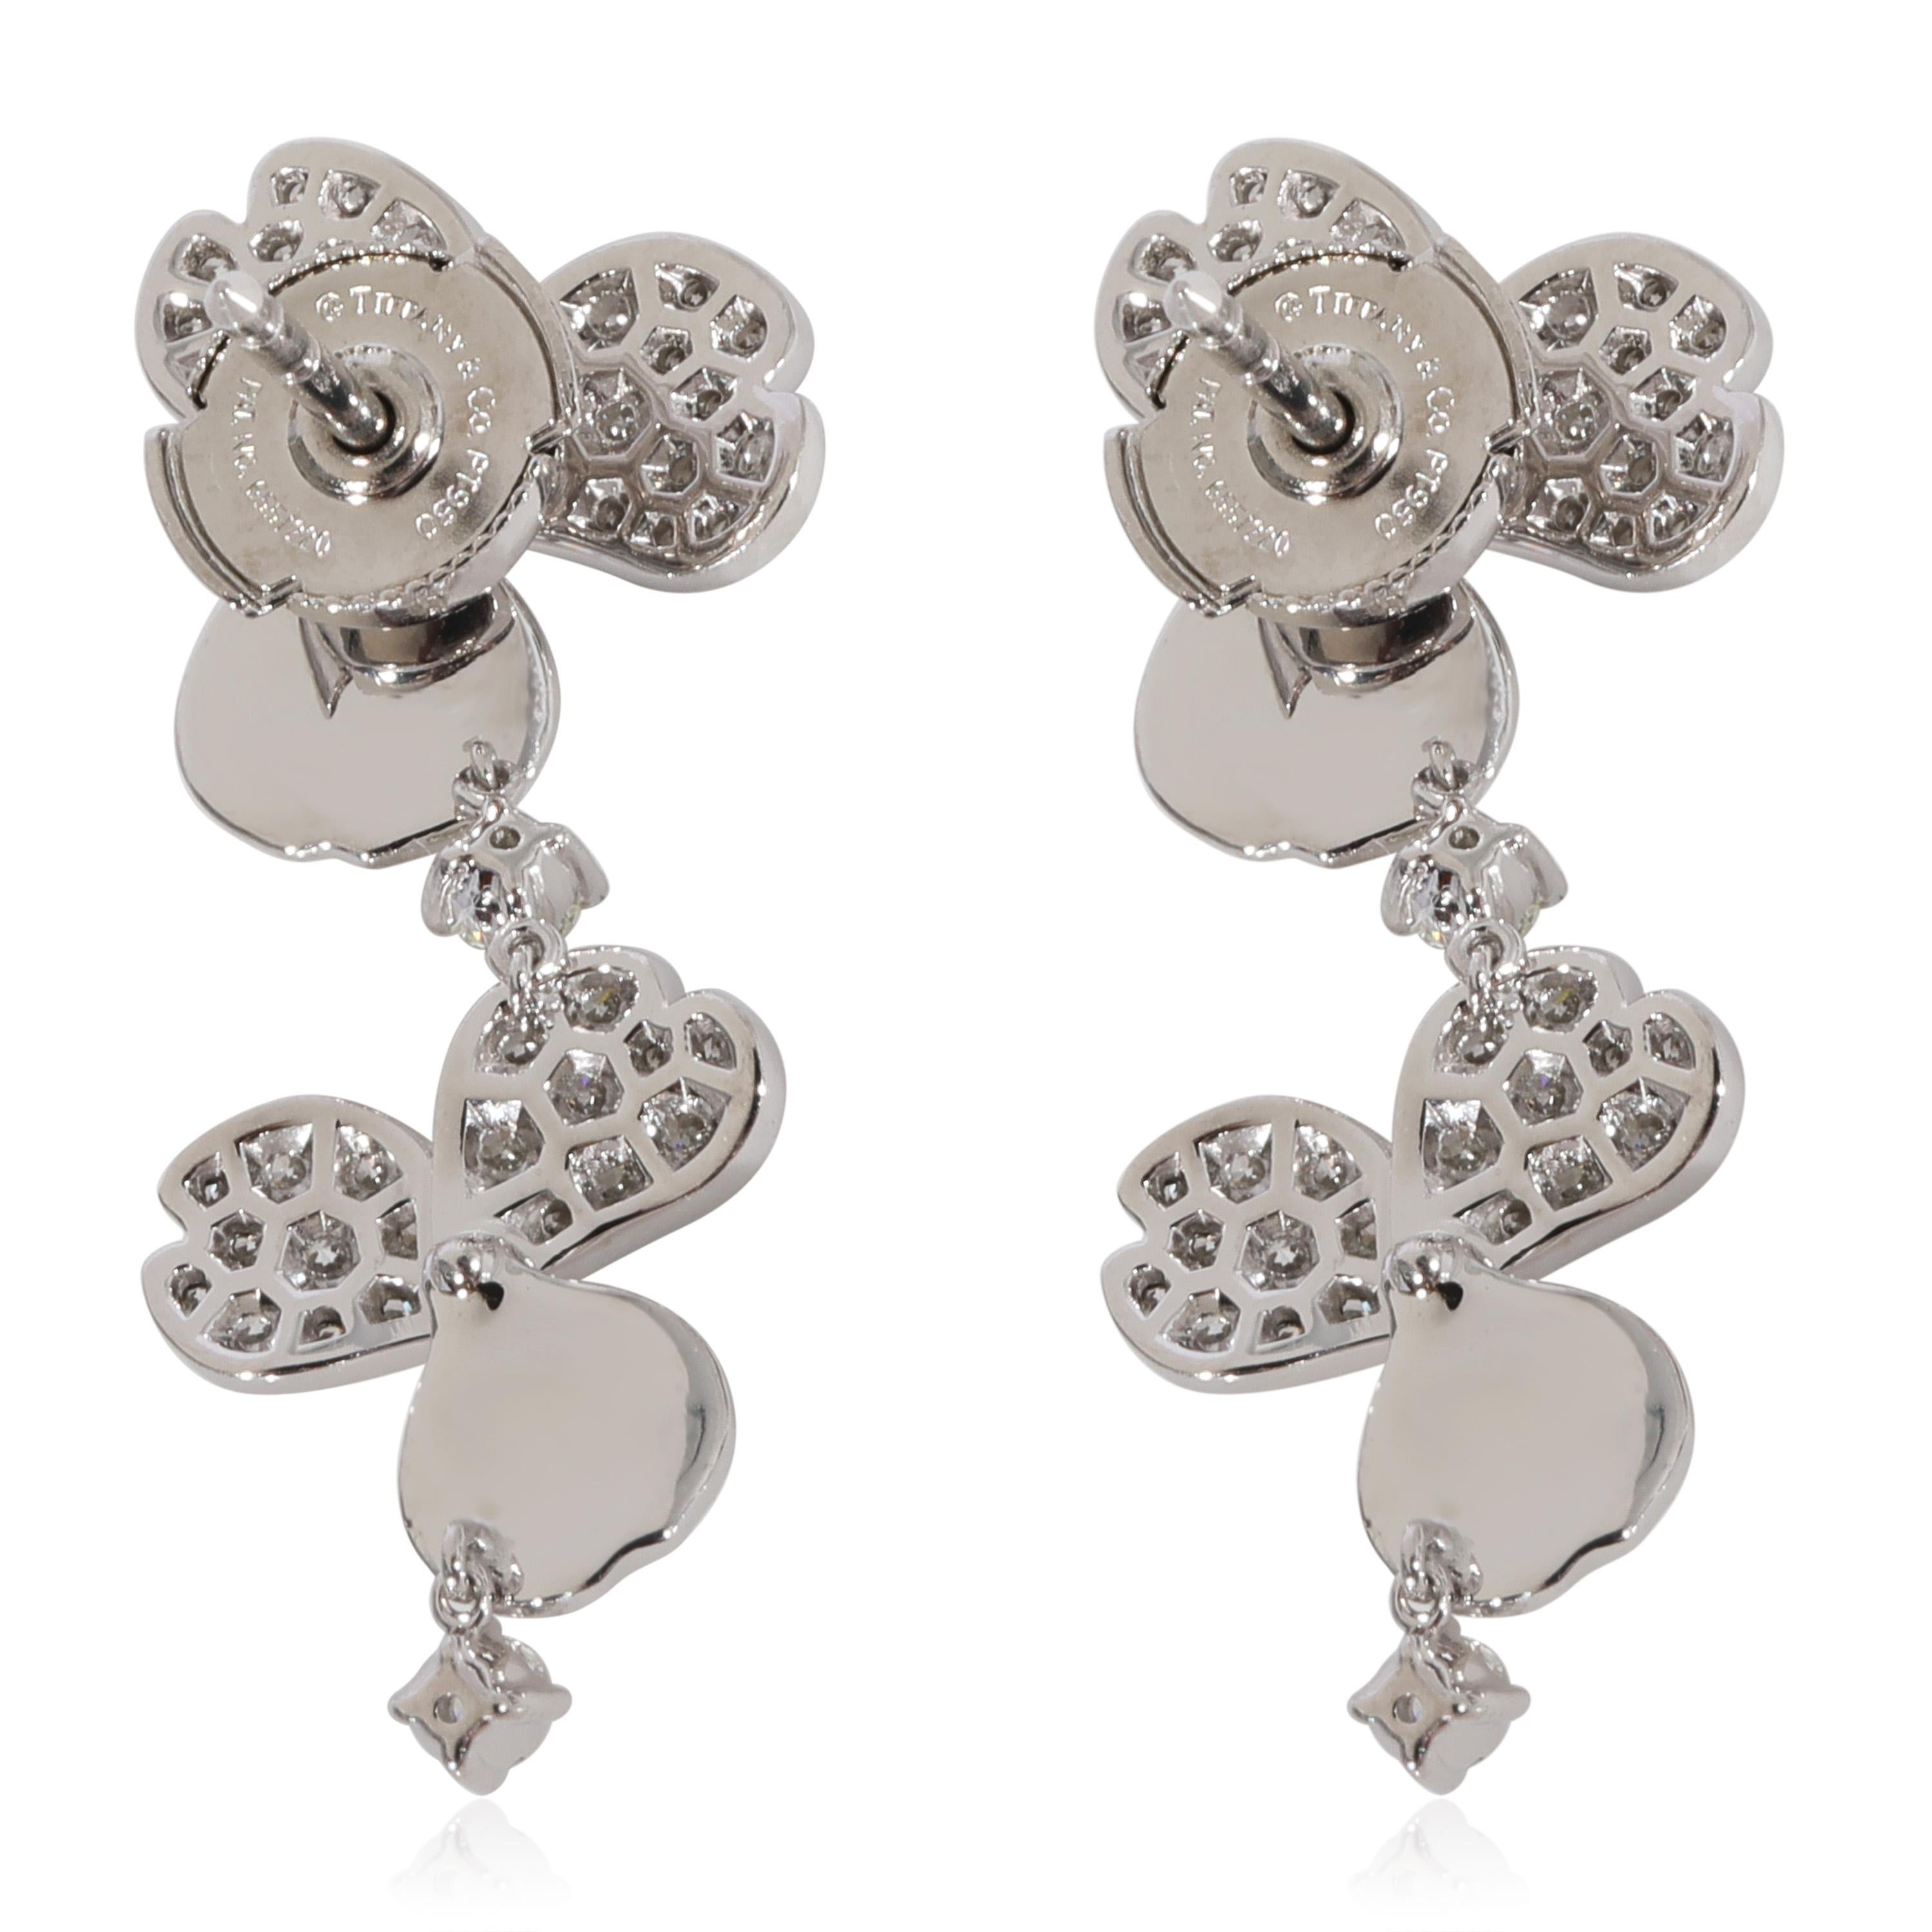 Tiffany & Co. Paper Flowers Diamond Earrings in 950 Platinum 1.02 CTW

PRIMARY DETAILS
SKU: 124400
Listing Title: Tiffany & Co. Paper Flowers Diamond Earrings in 950 Platinum 1.02 CTW
Condition Description: Retails for 9000 USD. In excellent